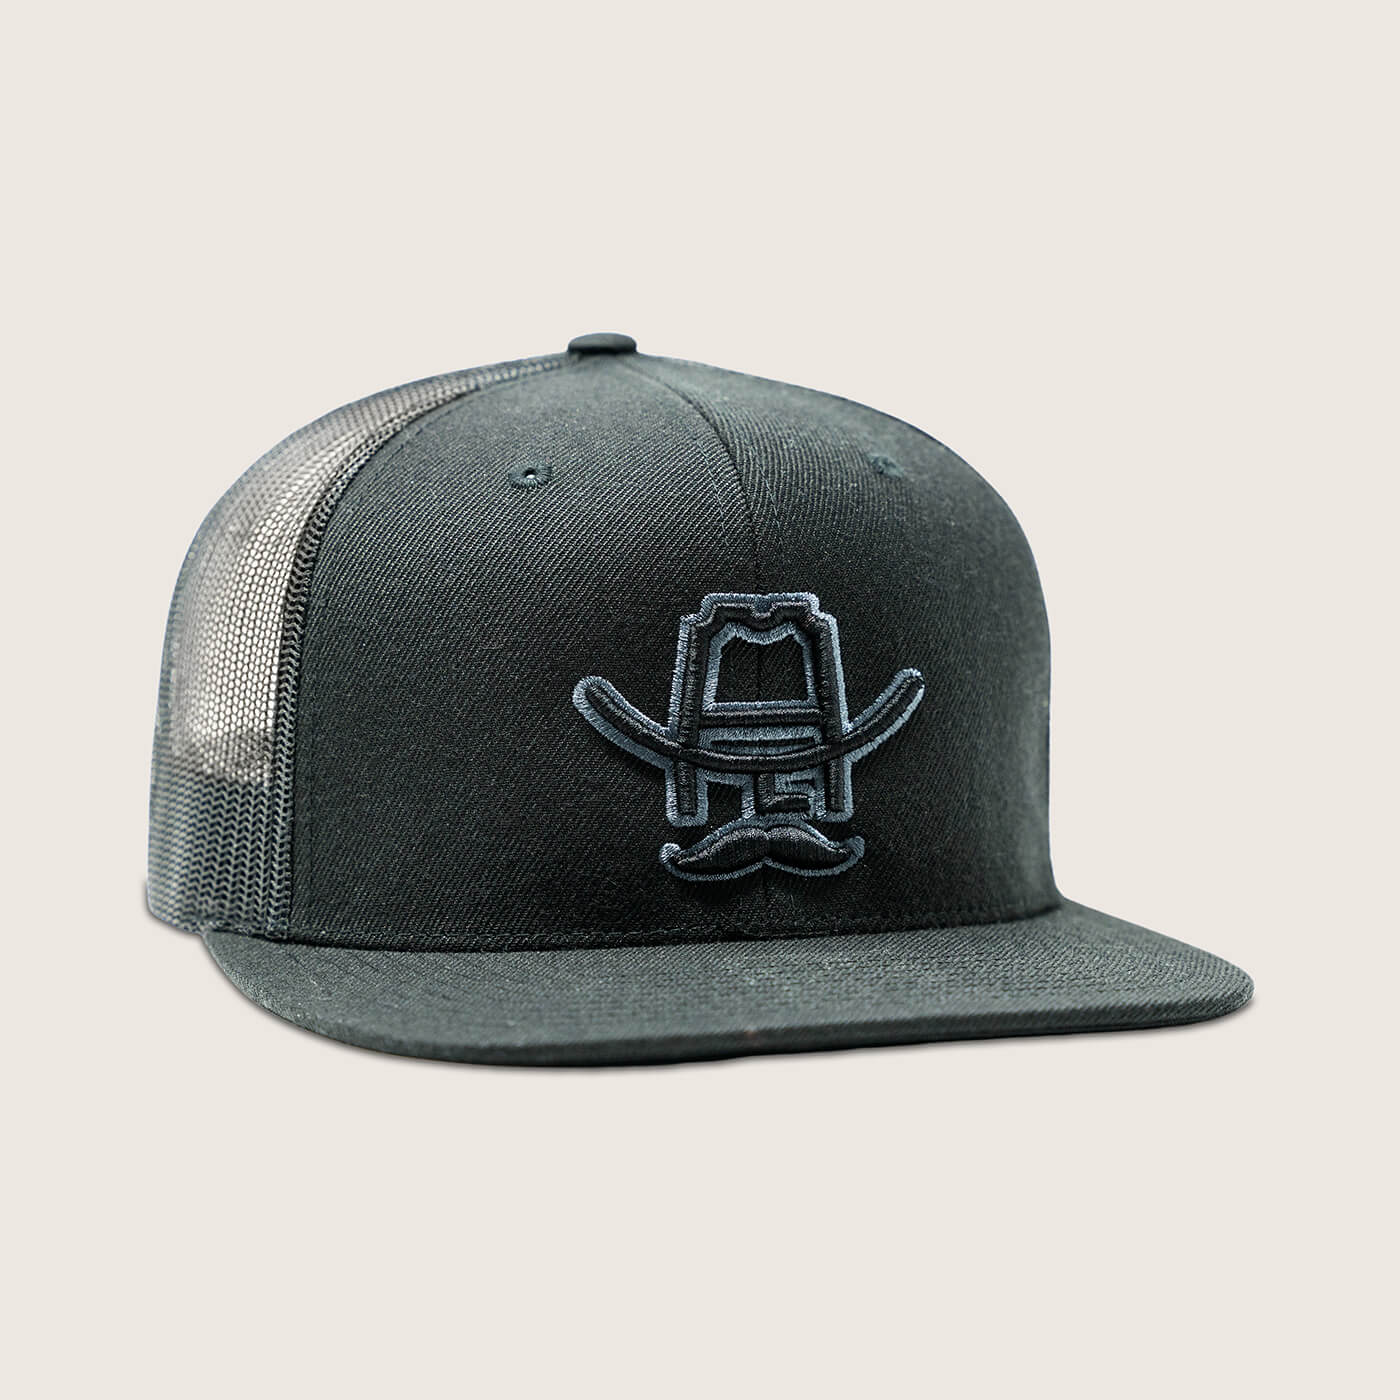 The Blackout Hat